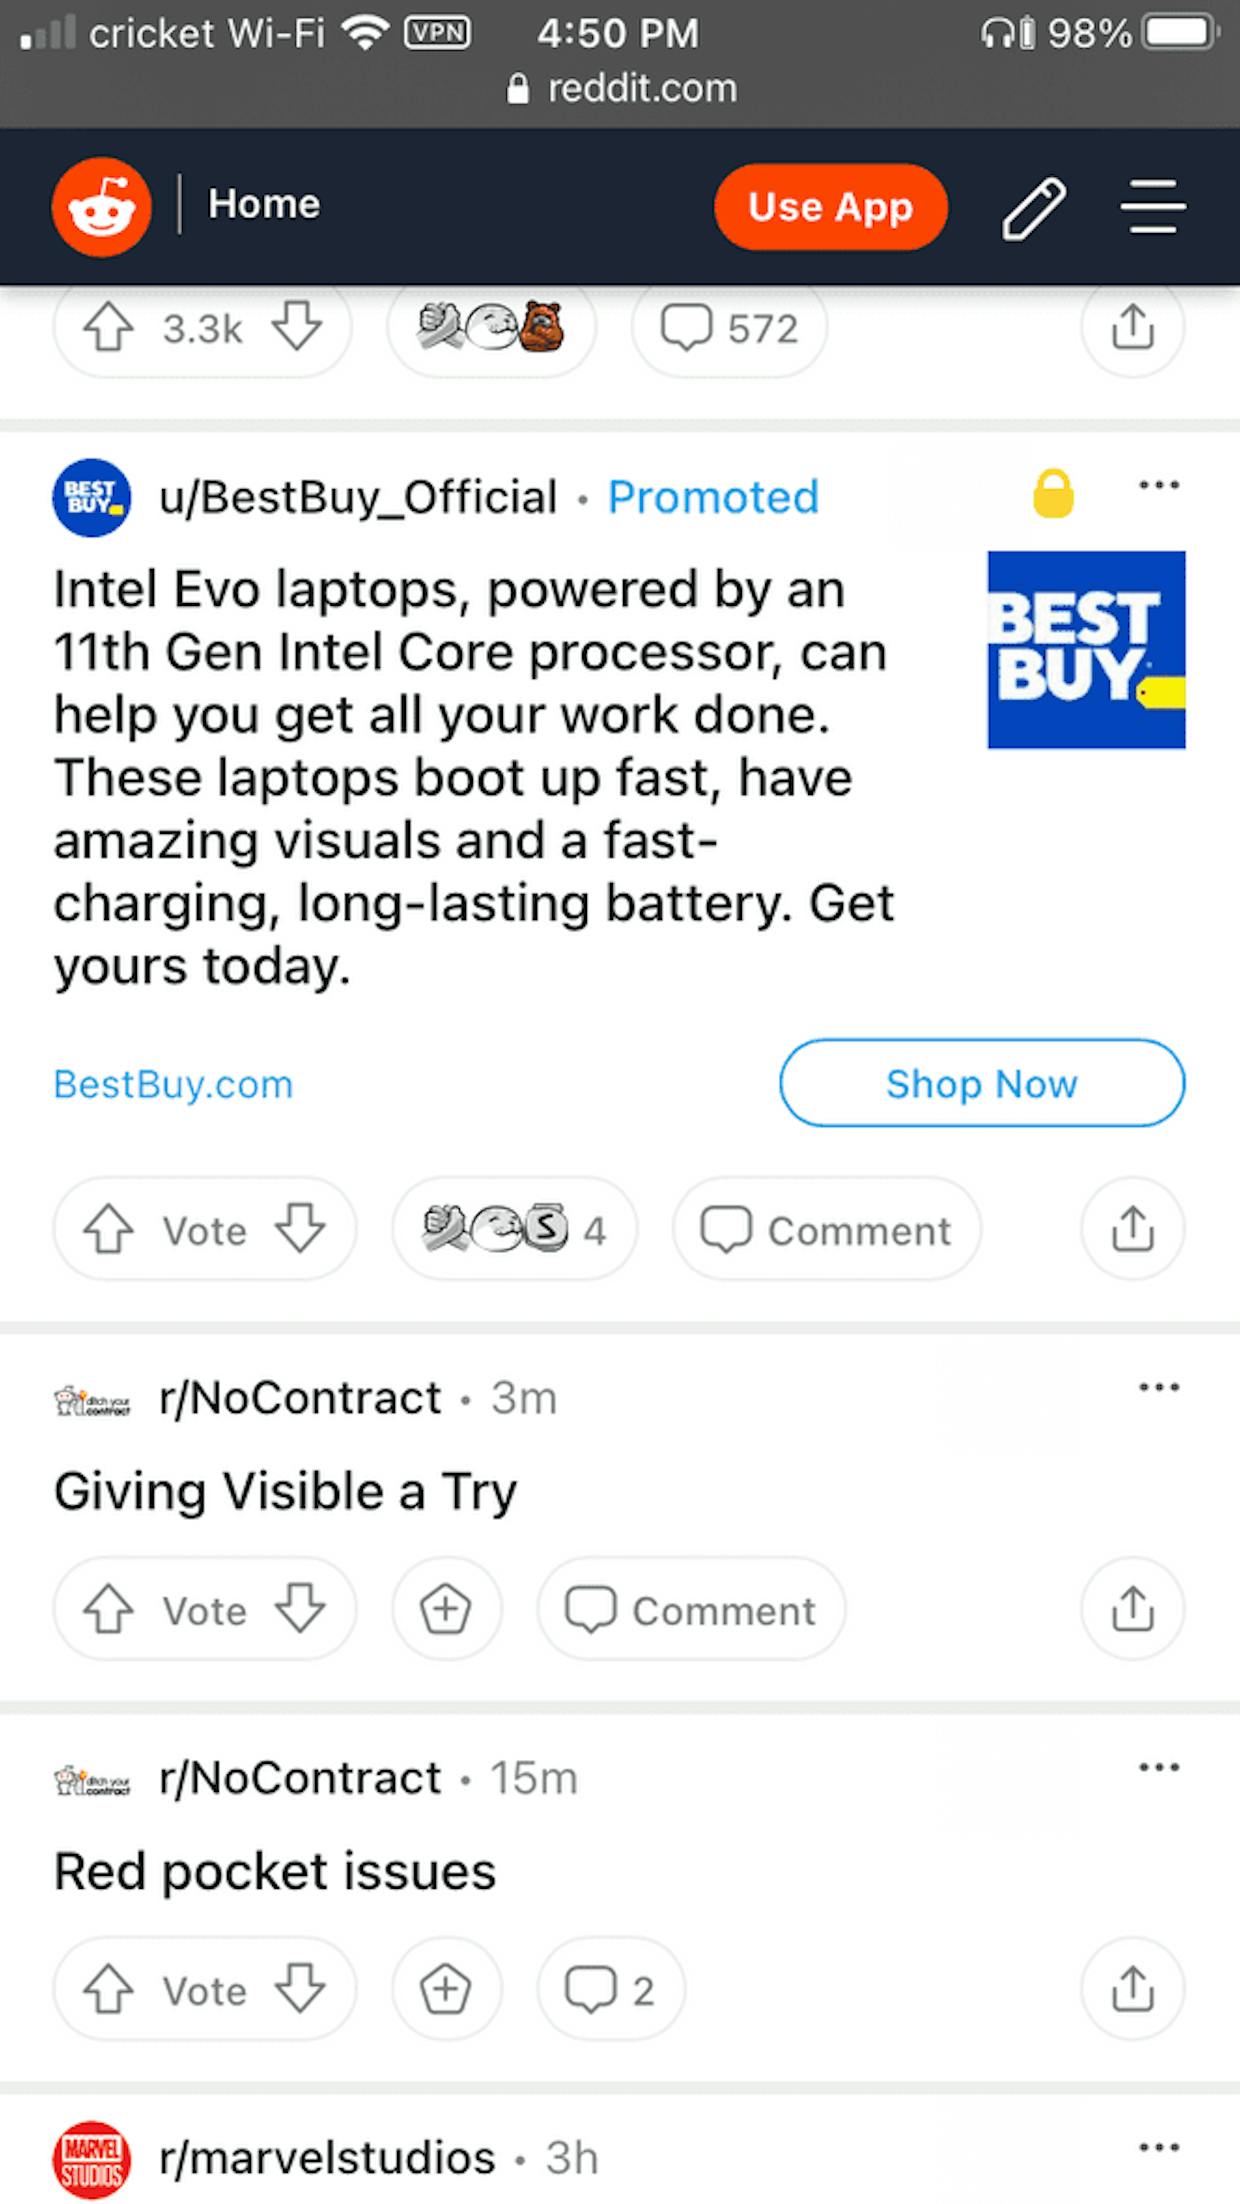 Here, in Safari, I scroll down on the Reddit page, and the Reddit floating bar is still visible.